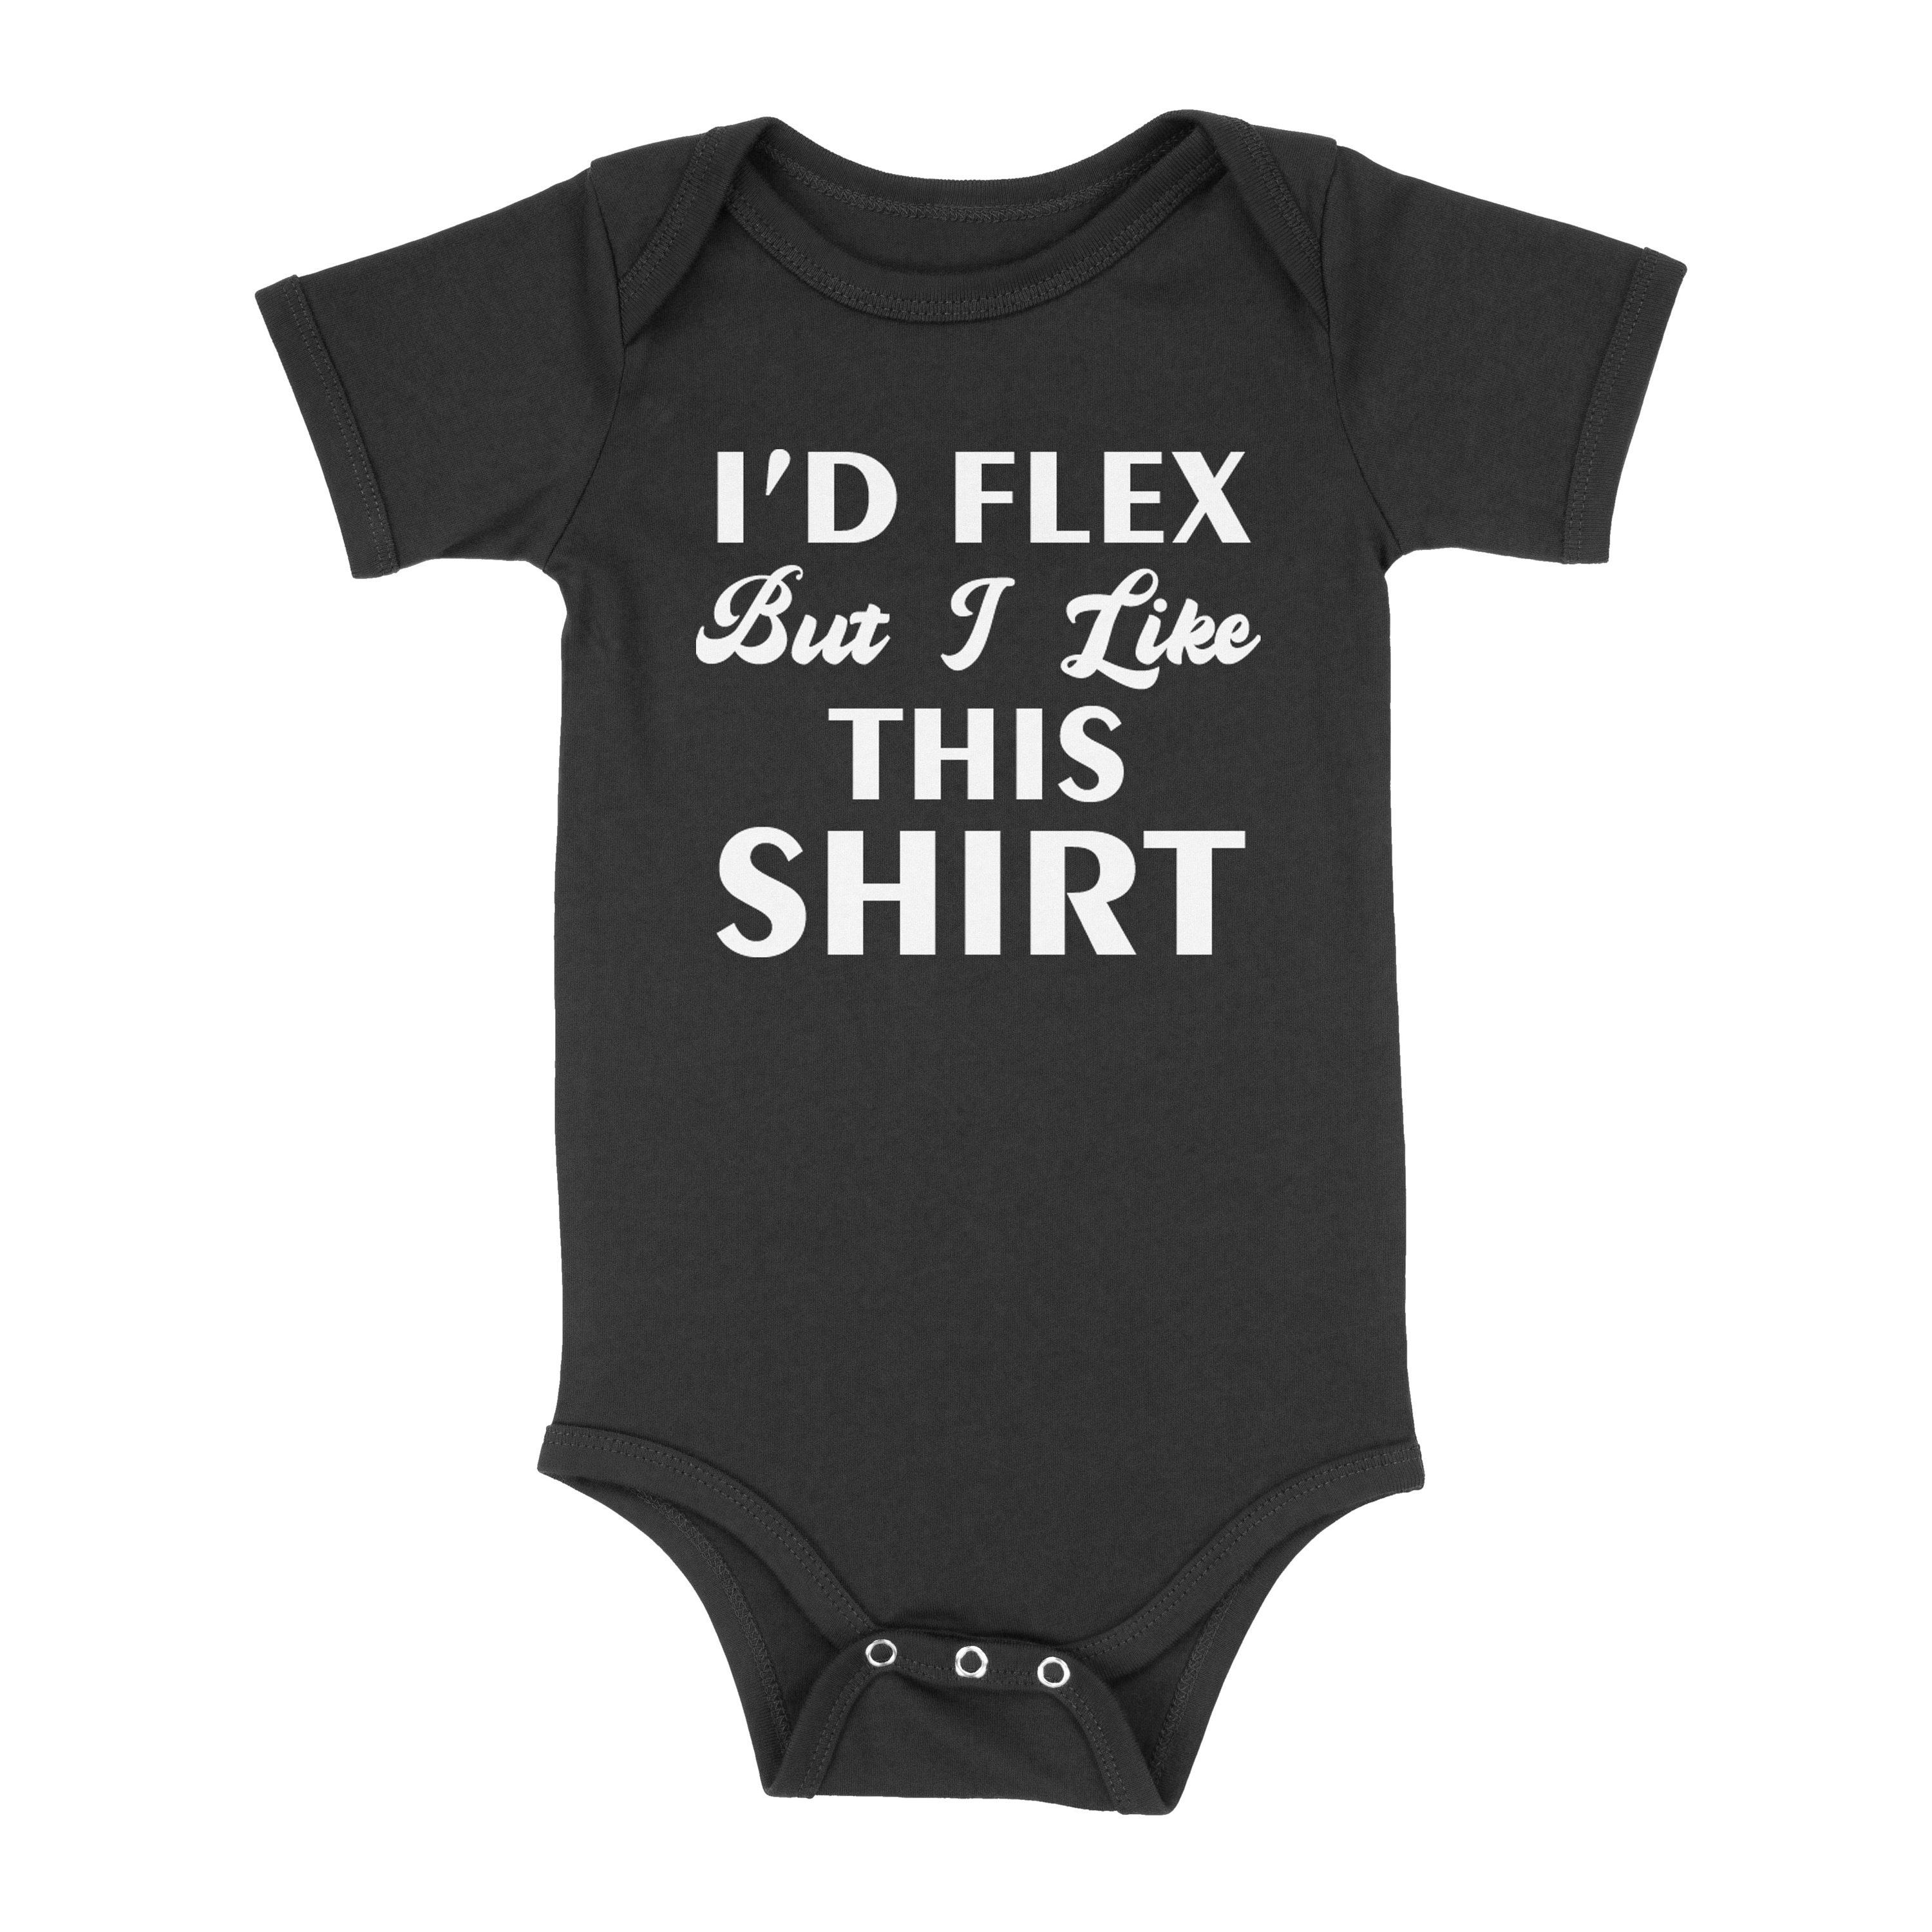 I'd Flex but I Like This Shirt Hilarious Funny Gym Pun Gains Little Workout  Buddy Fitness Lifestyle Active Baby Infant Bodysuit 